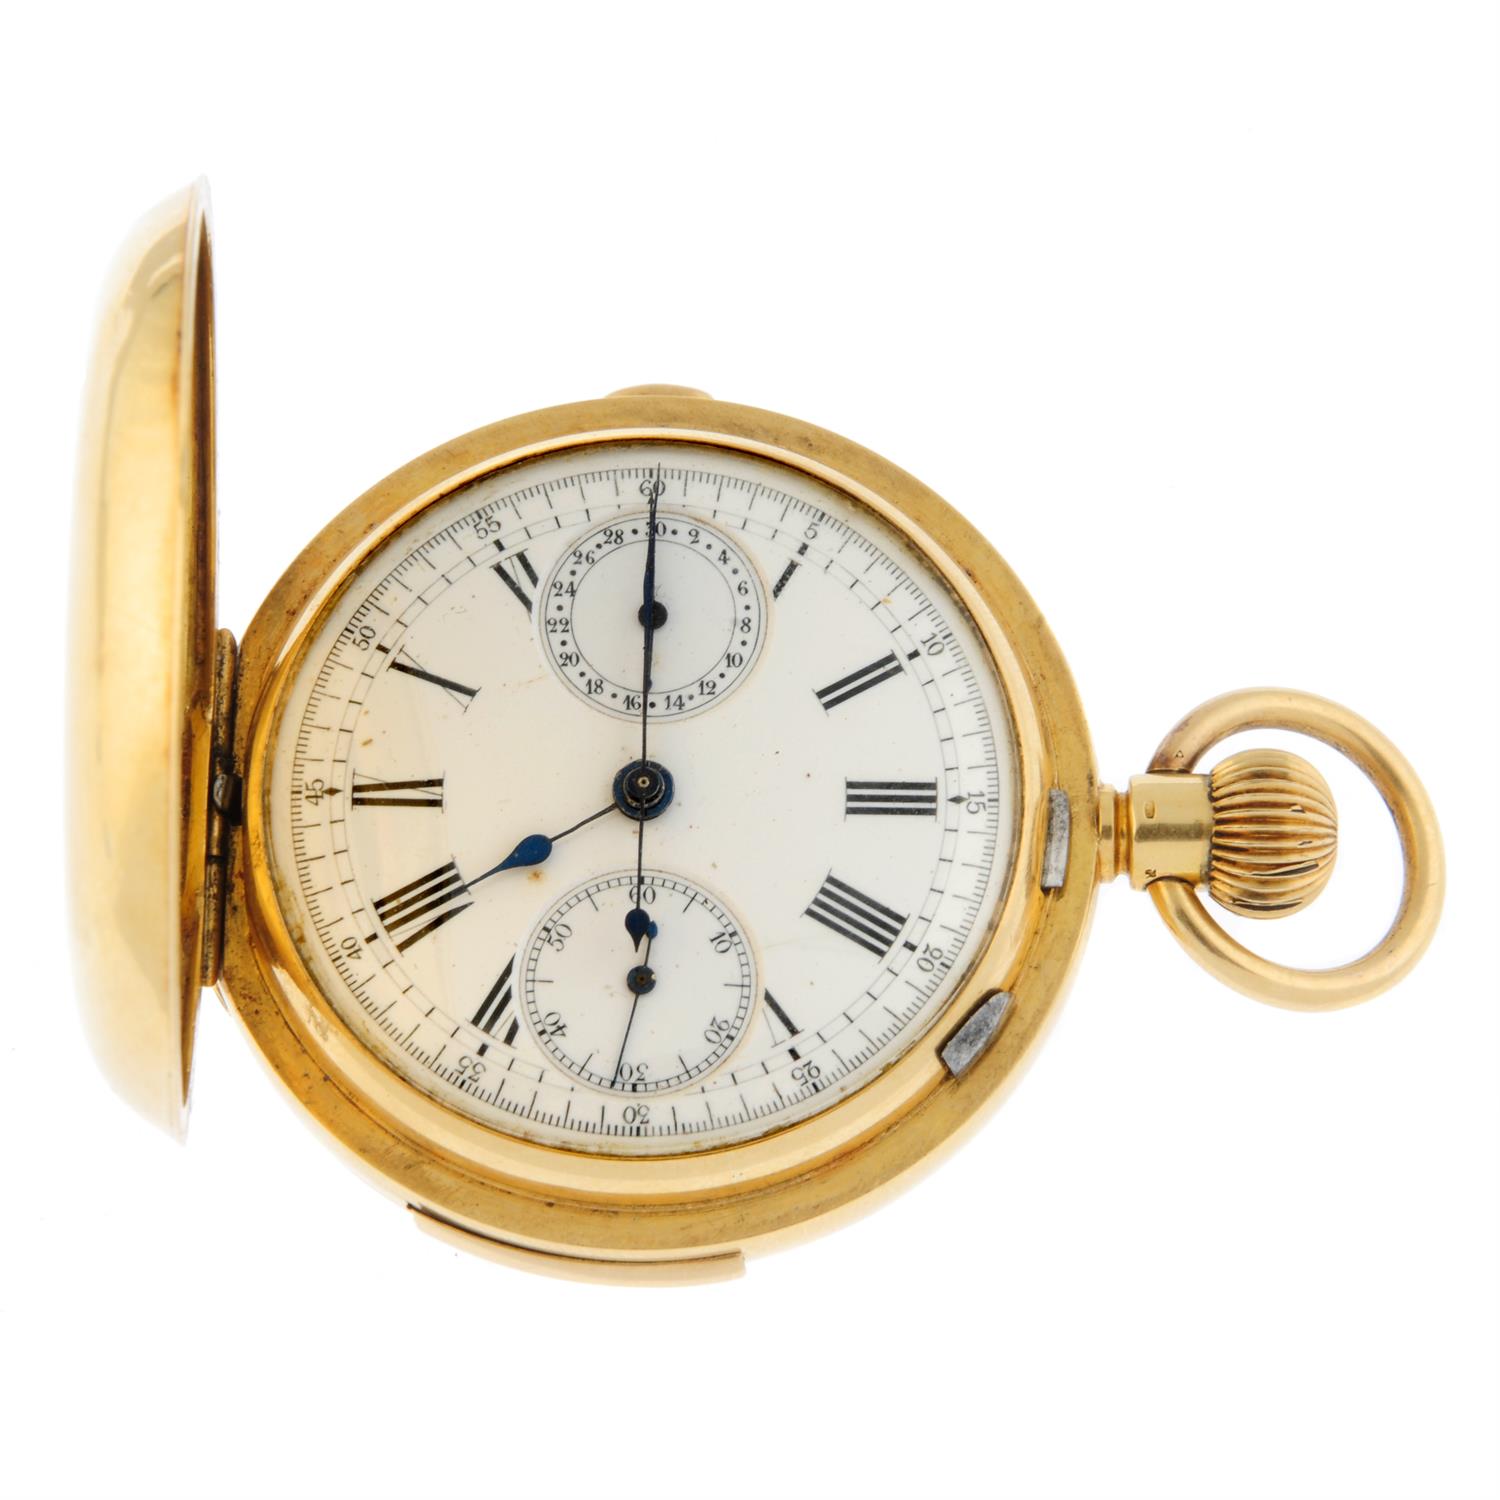 A full hunter repeater chronograph pocket watch, 52mm.